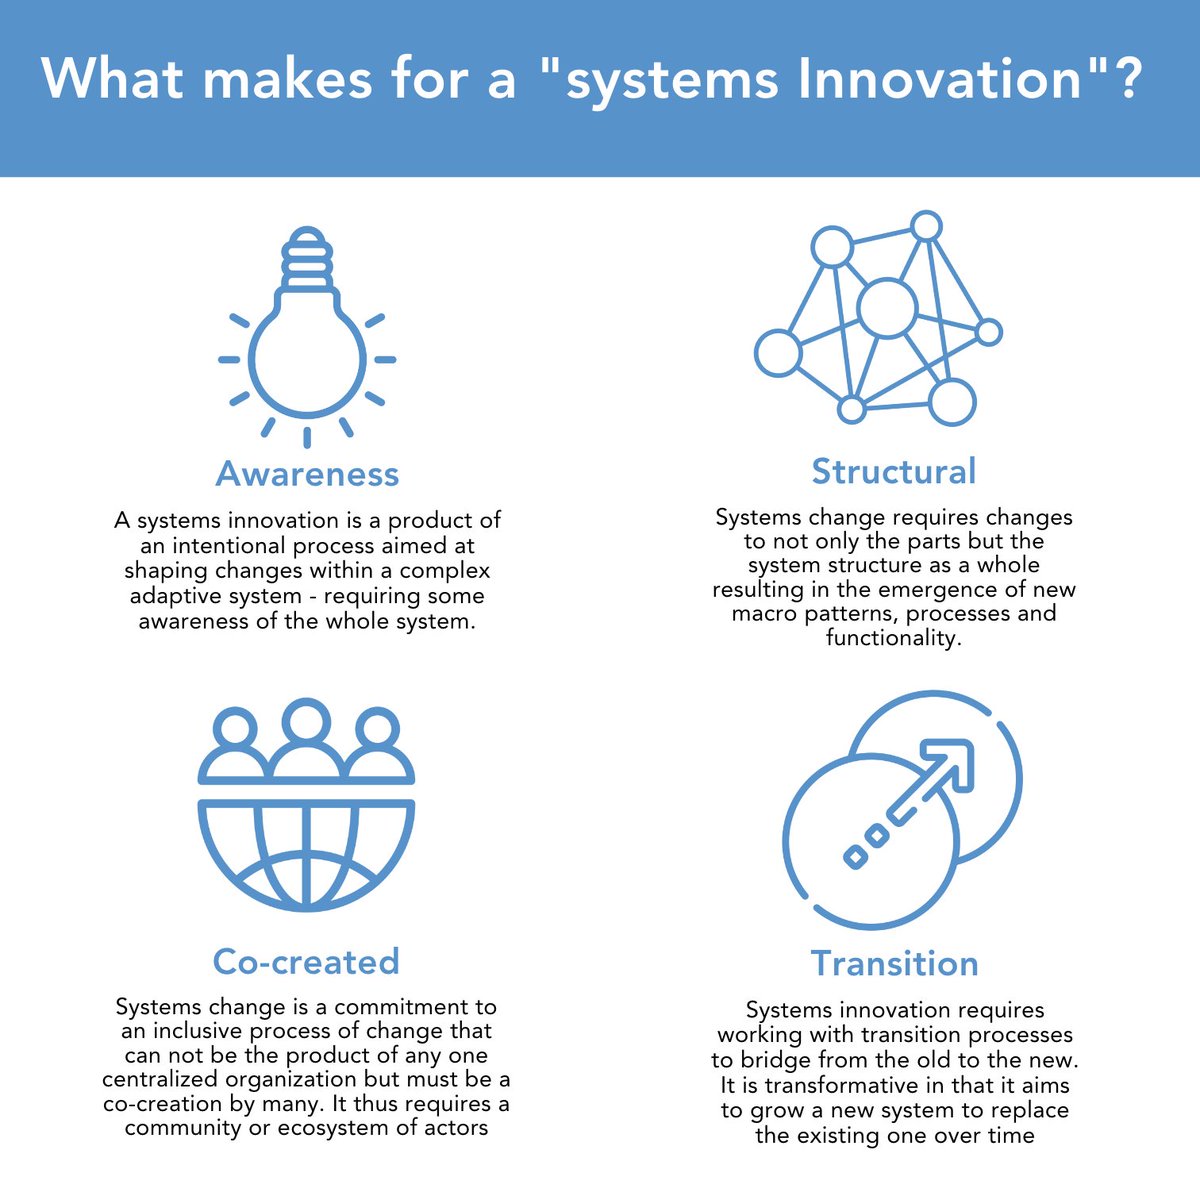 Key aspects of a systems innovation. Graphic taken from our graphics kit: t.ly/zuKP6